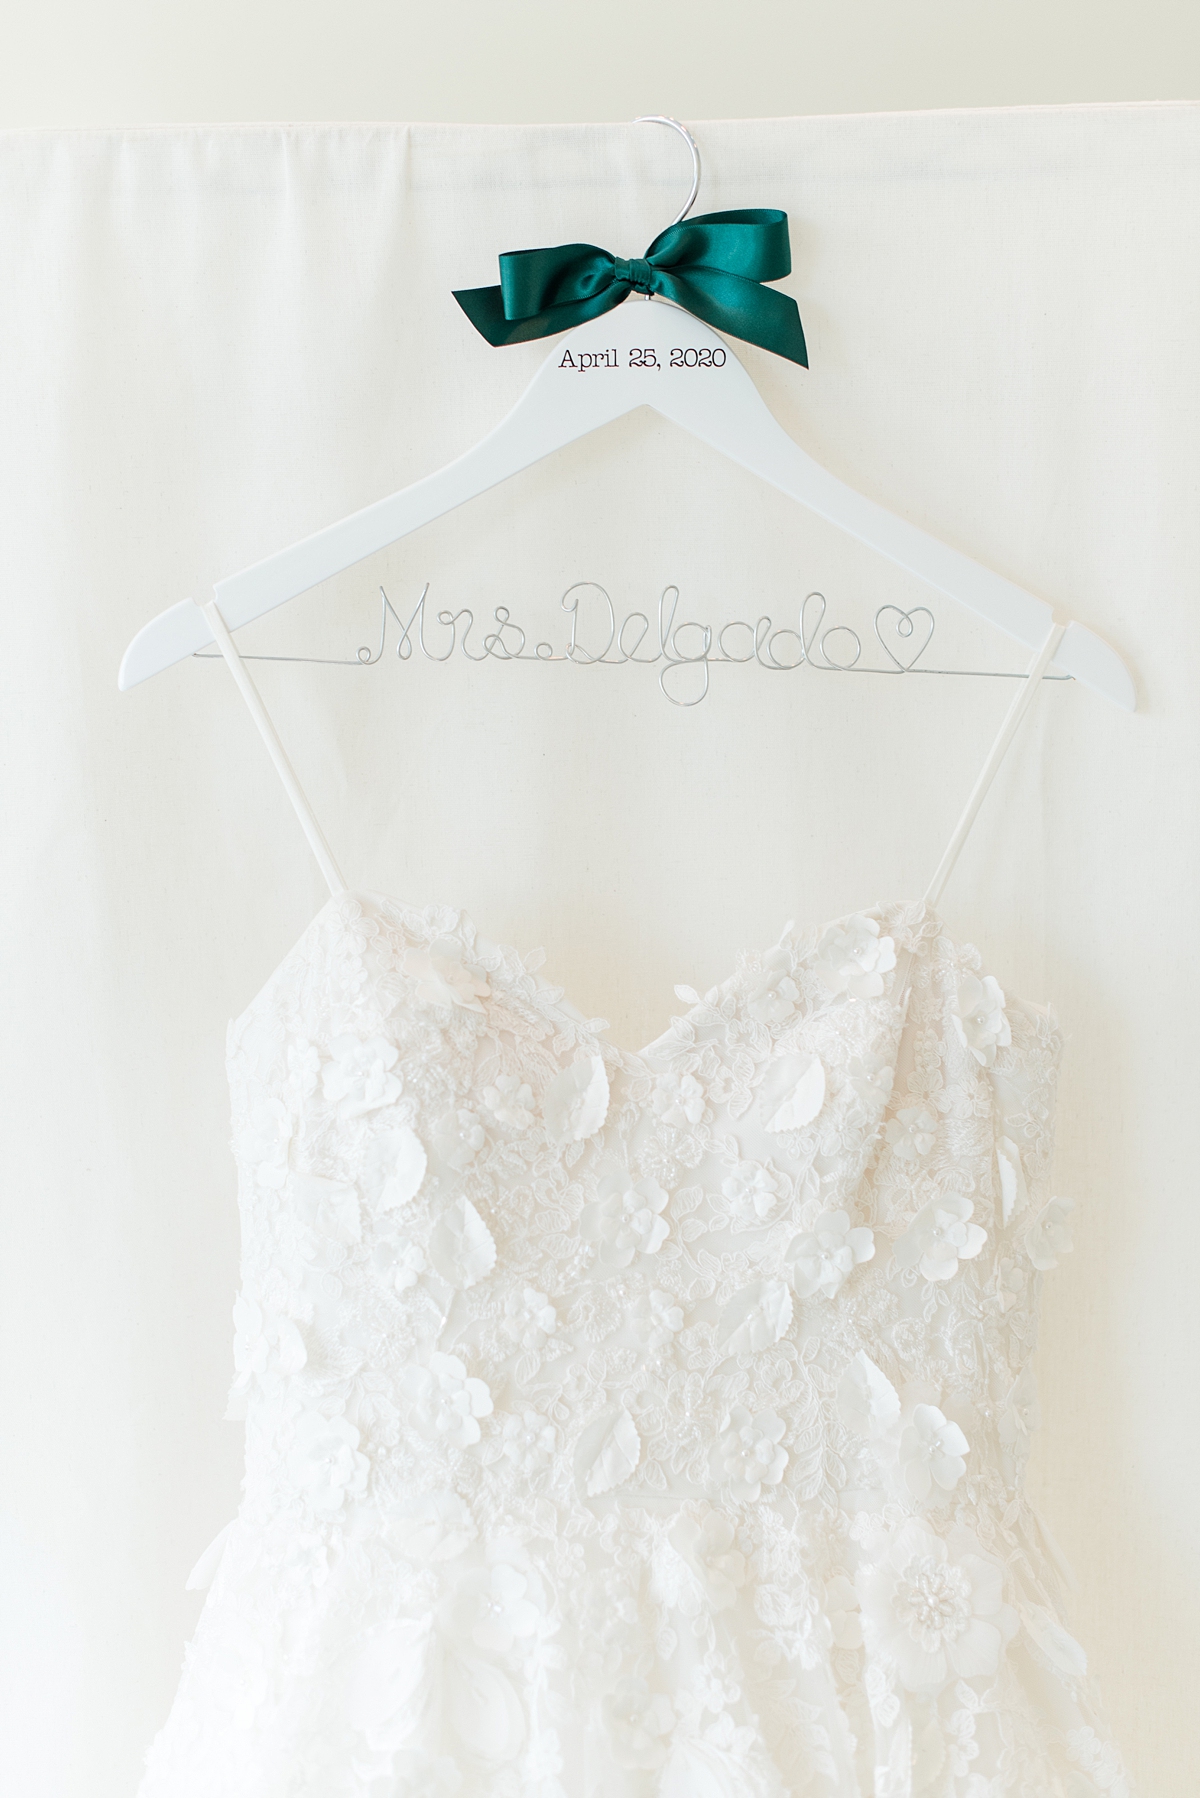 Bridal Details of Wedding Dress and Custom Dress Hanger at Dominion Club Wedding. Wedding Photography by Virginia Wedding Photographer Kailey Brianne Photography.